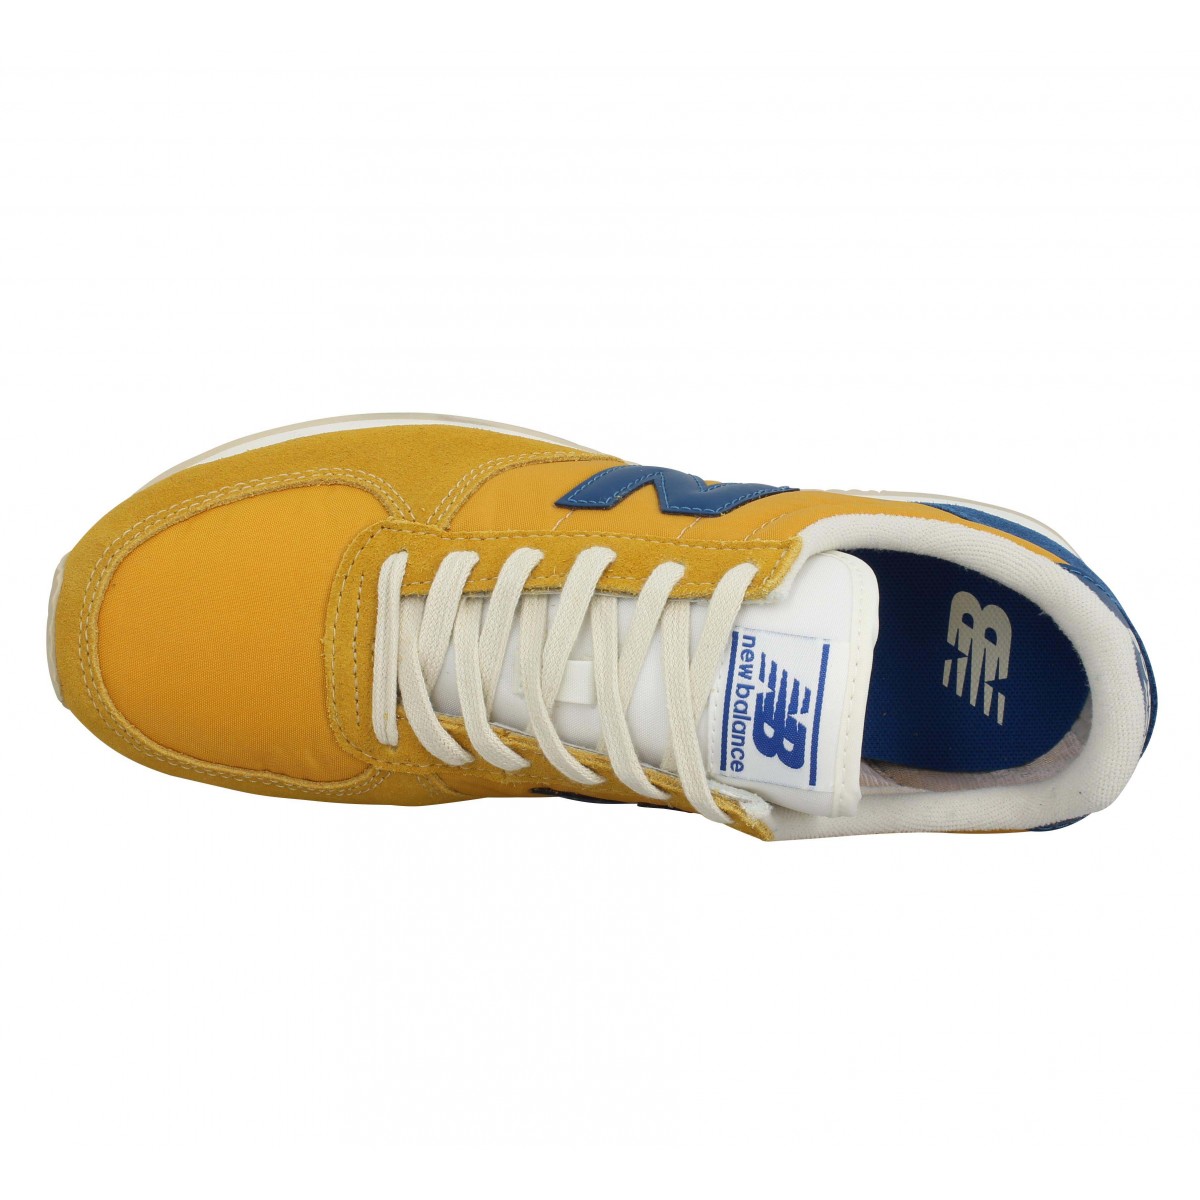 New balance 220 toile homme jaune homme | Fanny chaussures